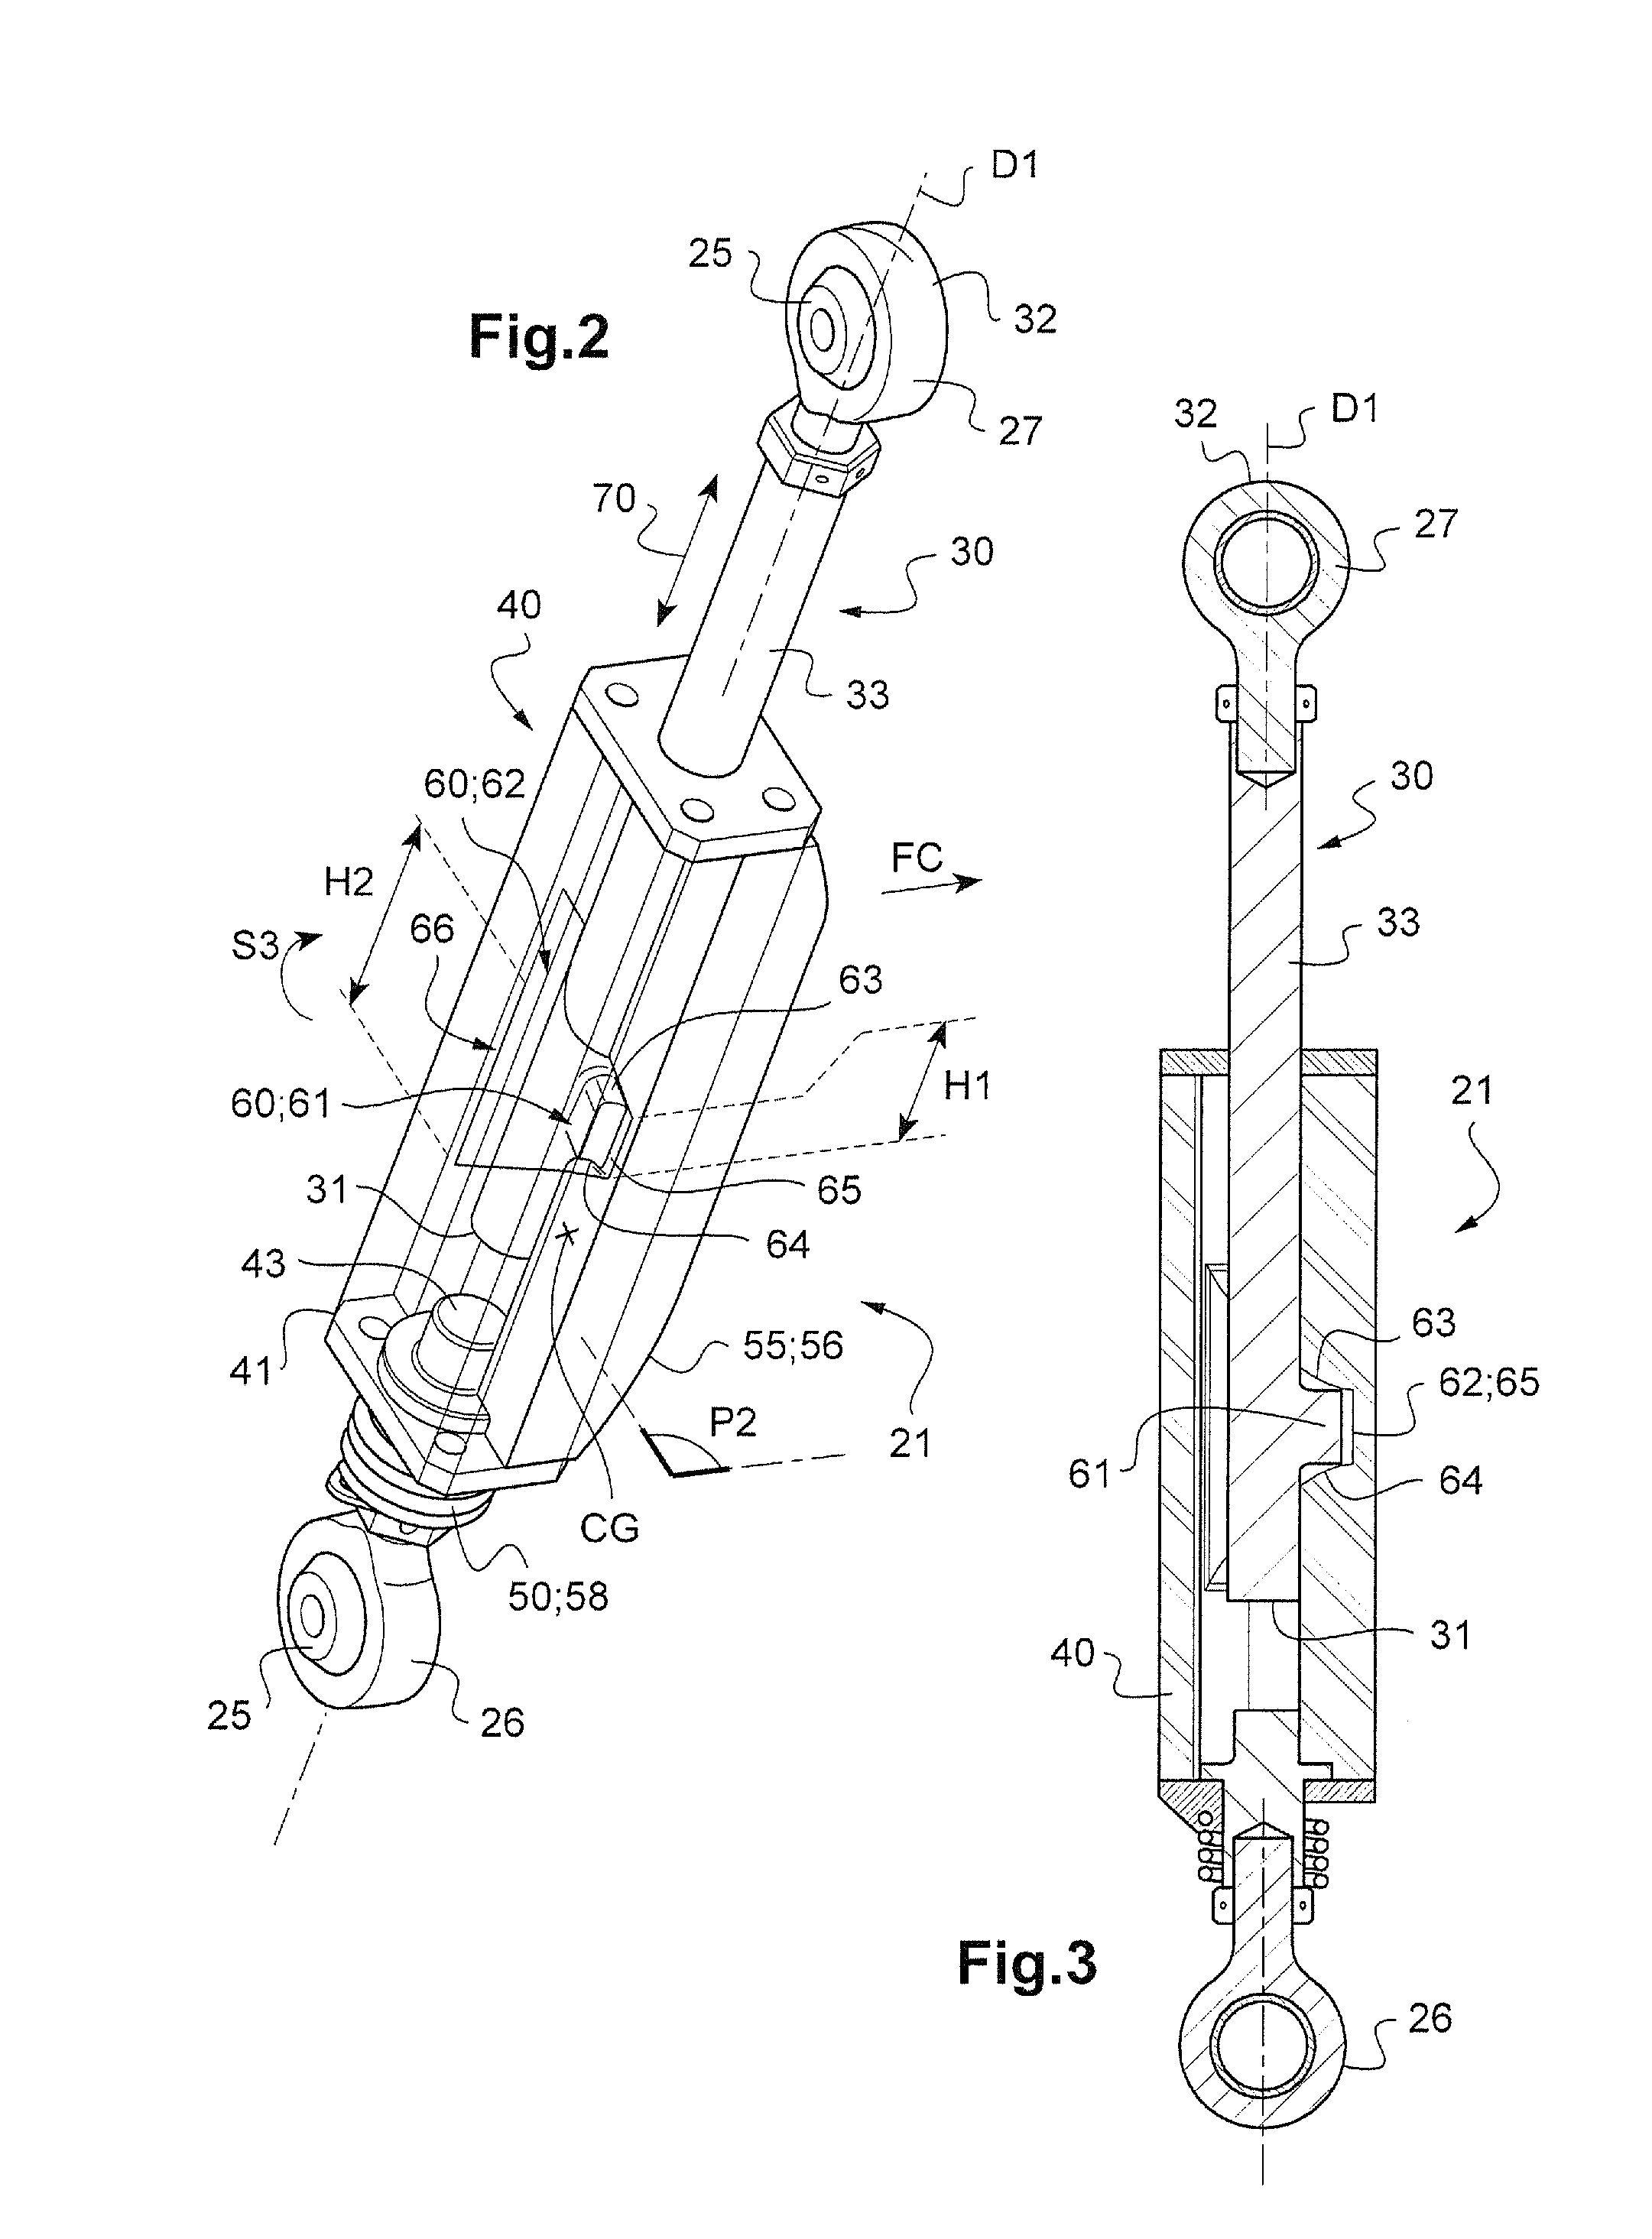 Flapping abutment mechanism for a lift assembly, a rotorcraft rotor including the abutment mechanism, and a rotorcraft